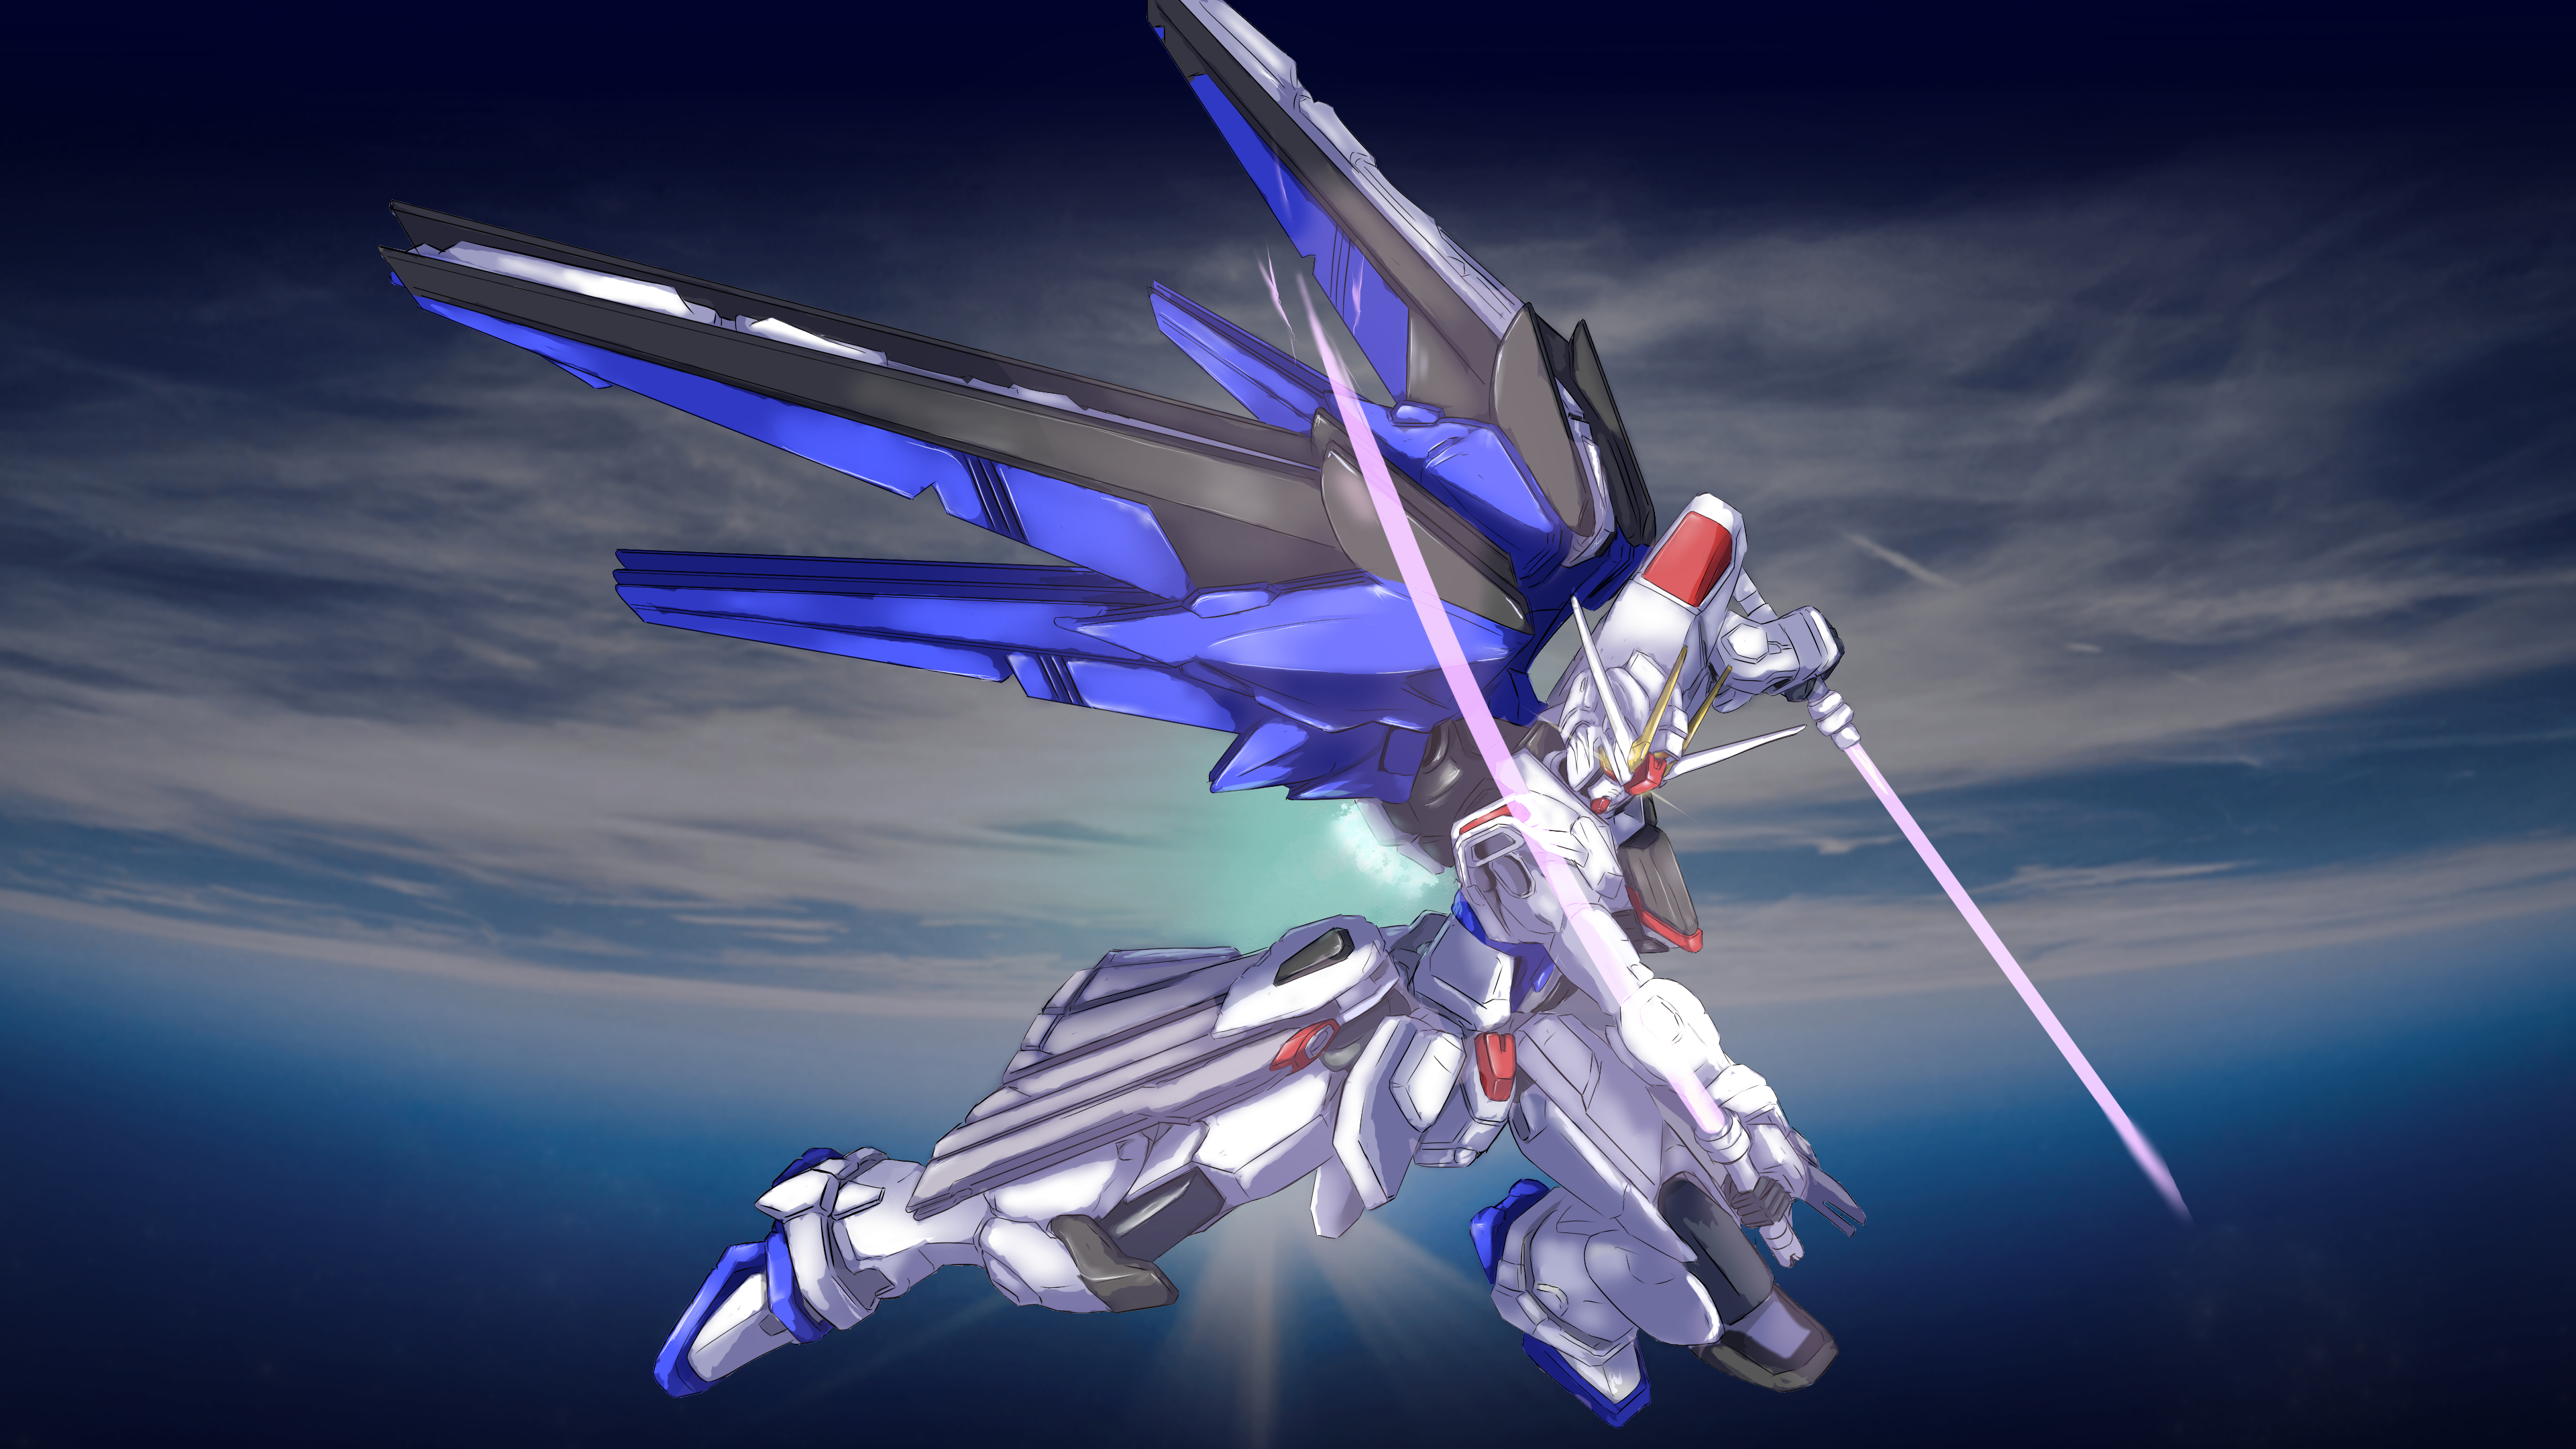 Anime Mobile Suit Gundam SEED HD Wallpaper | Background Image